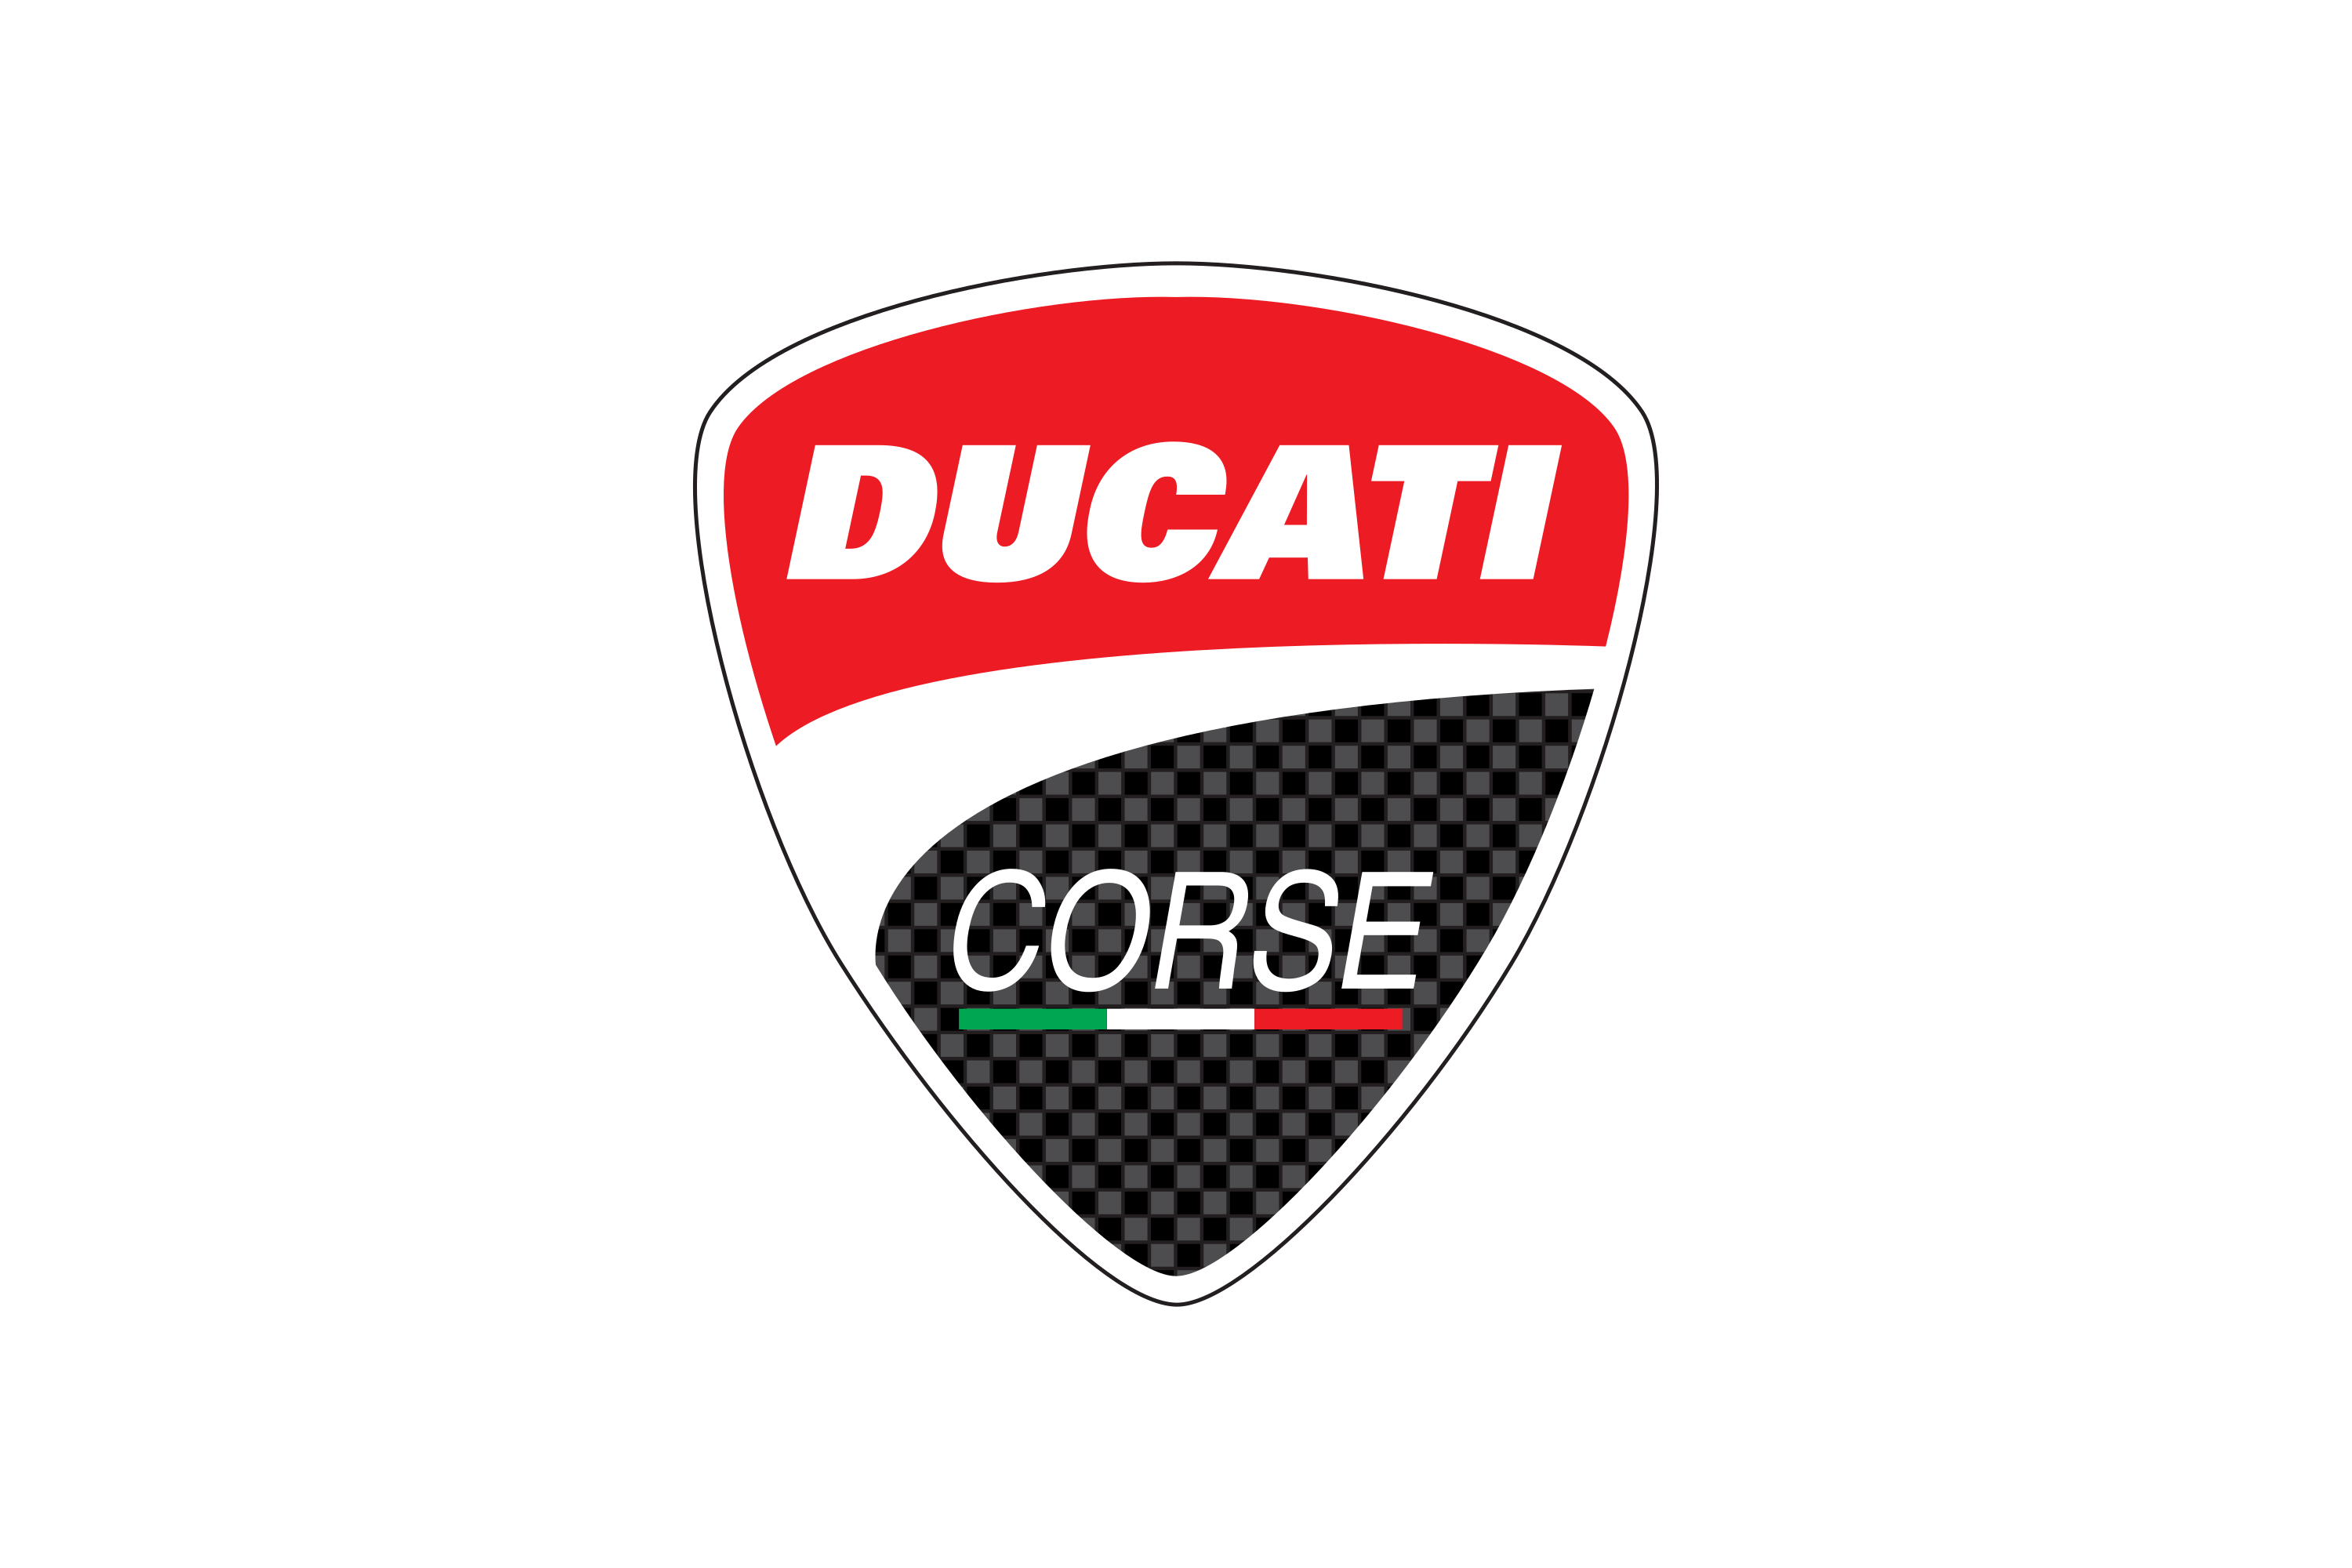 Download Ducati Corse Logo In Svg Vector Or Png File Format Logo Wine